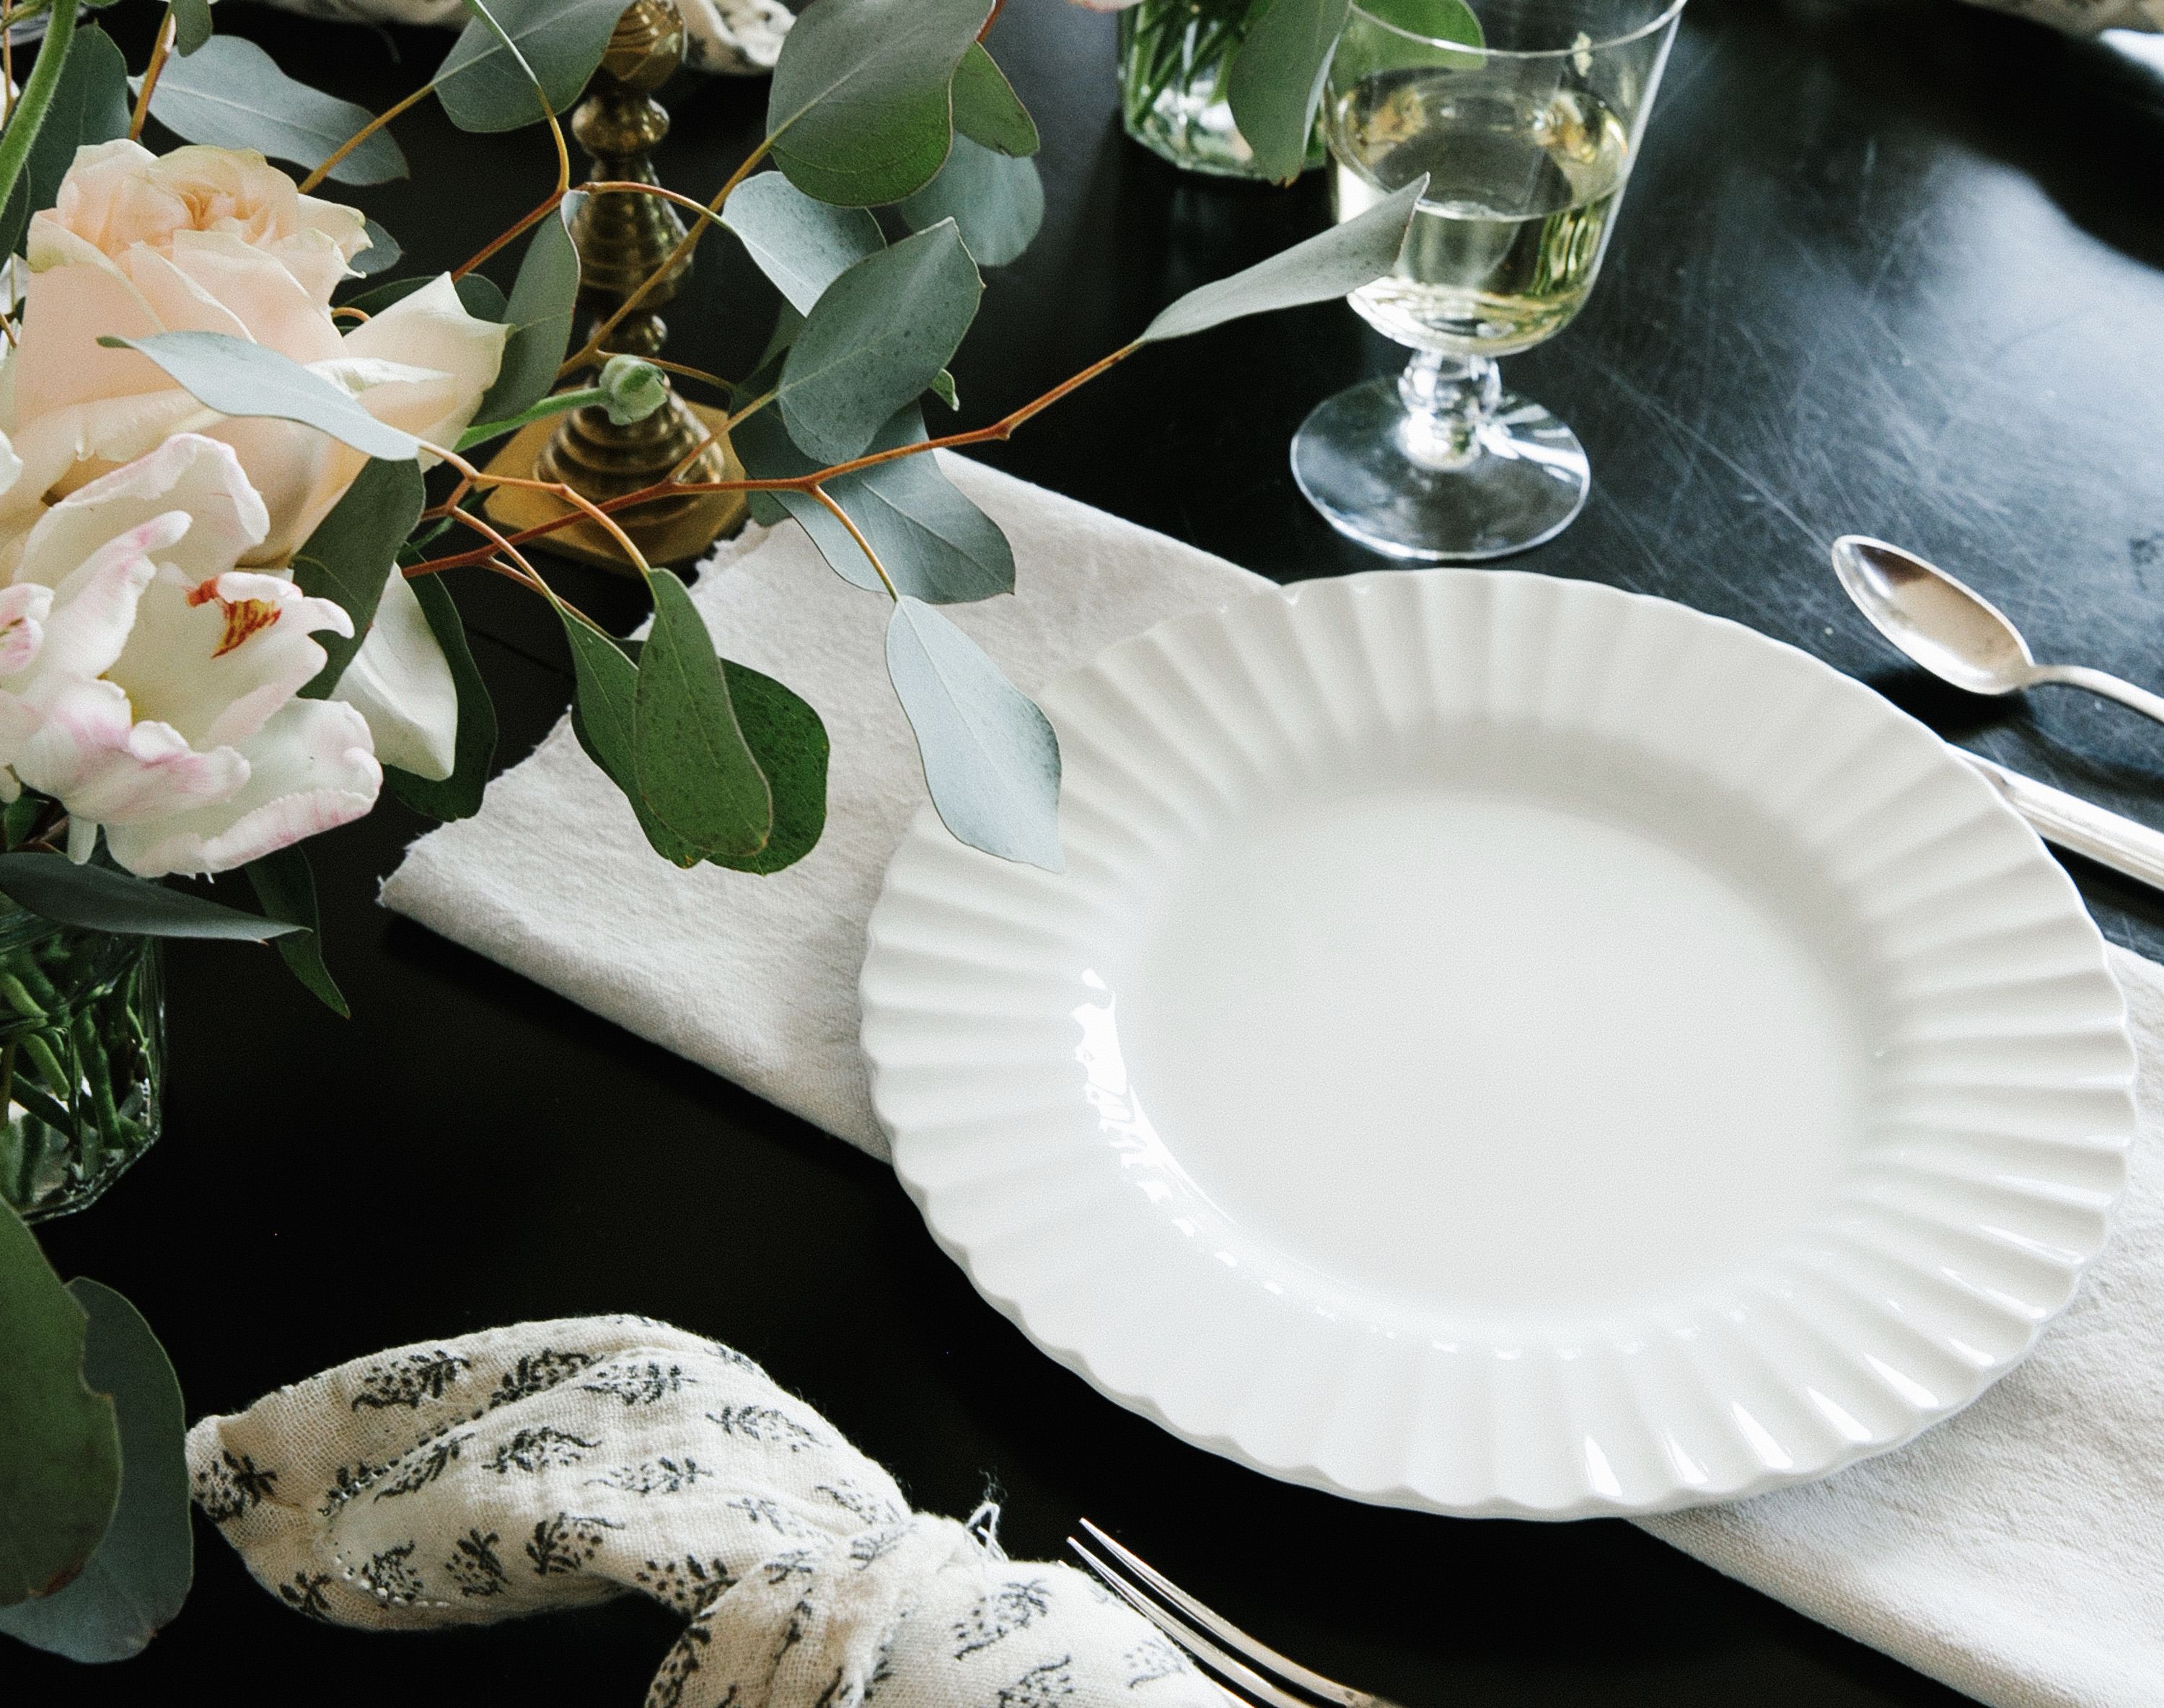 black table with table setting, white plate, patterned napkin, silverware, flowers, wine glass